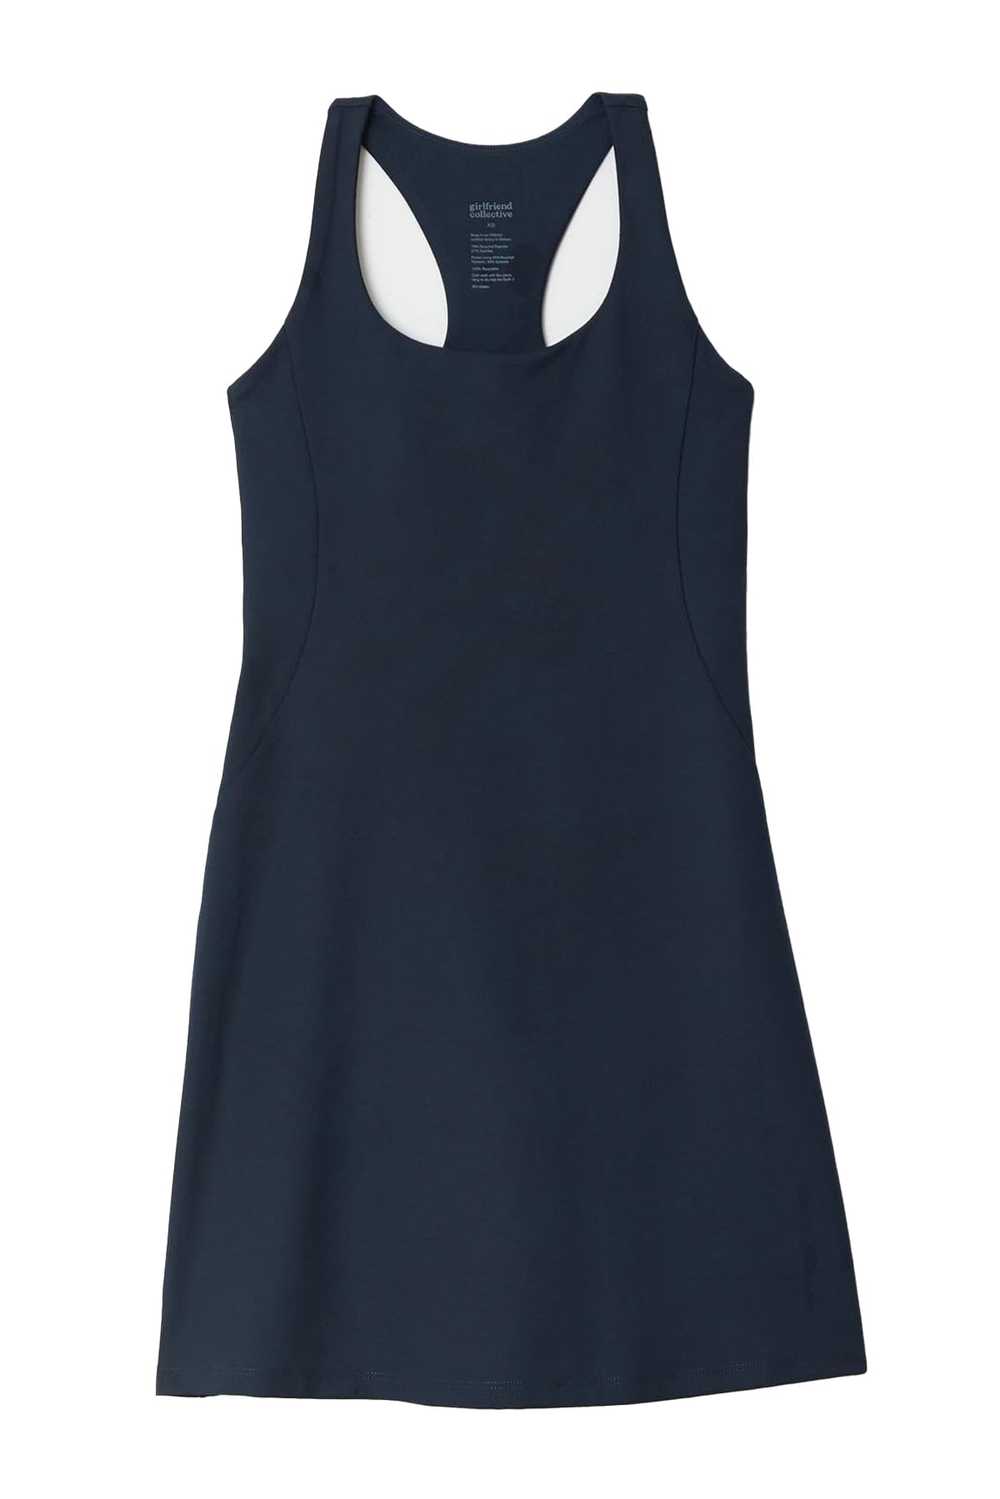 Girlfriend Collective Midnight Paloma Racerback D… - image 3